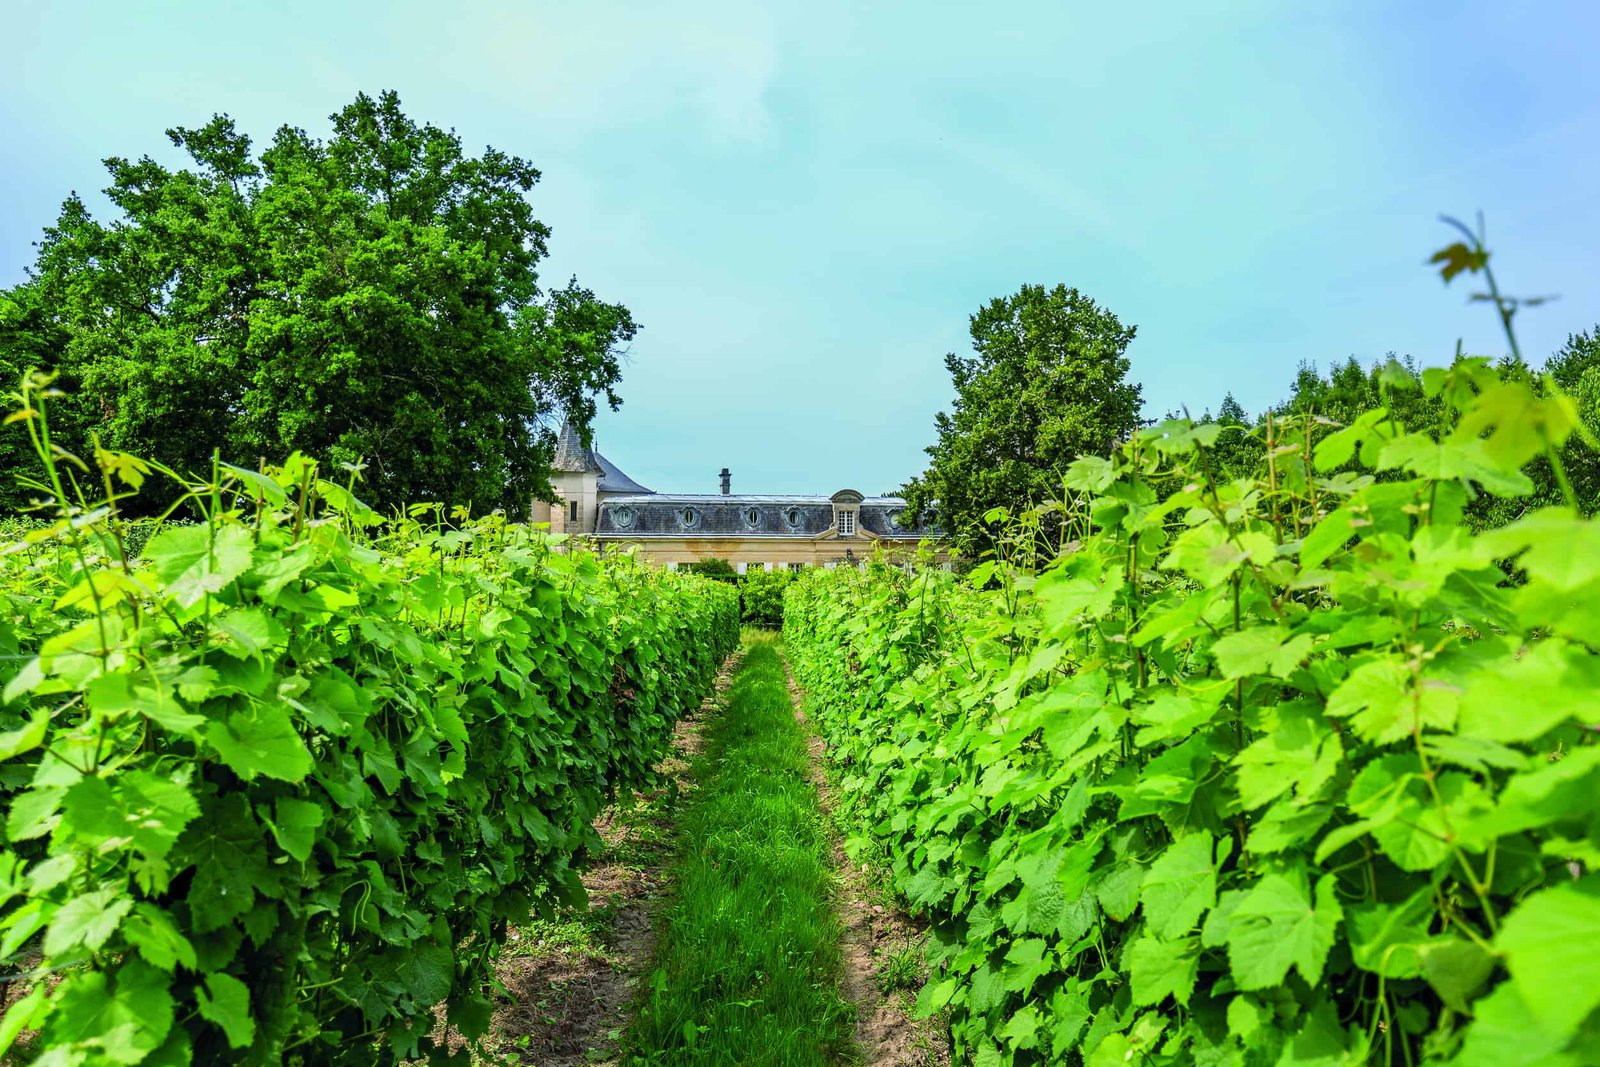 A vineyard with green vines, perfect for picking fruits and crops, and a charming house in the background.